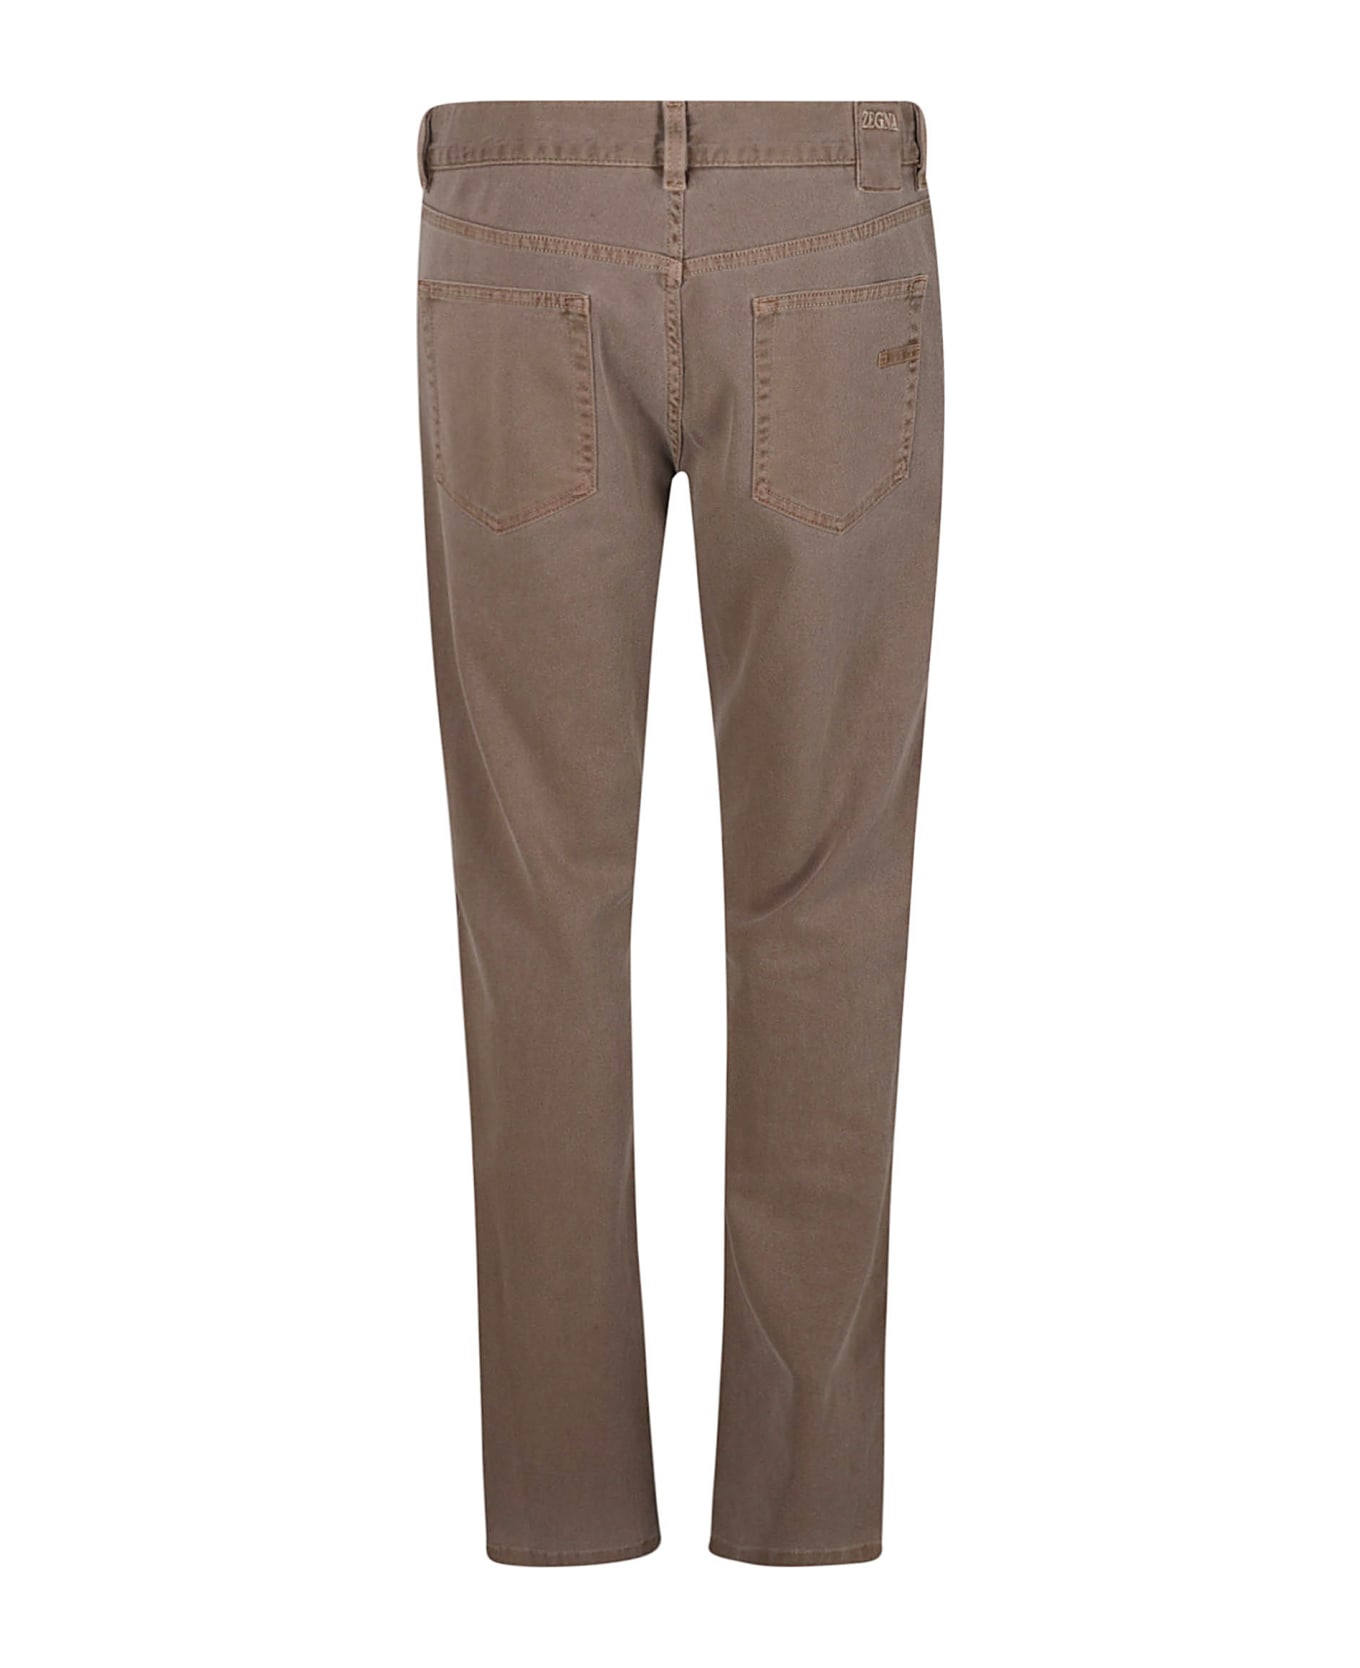 Zegna City Button Fitted Jeans - Brown